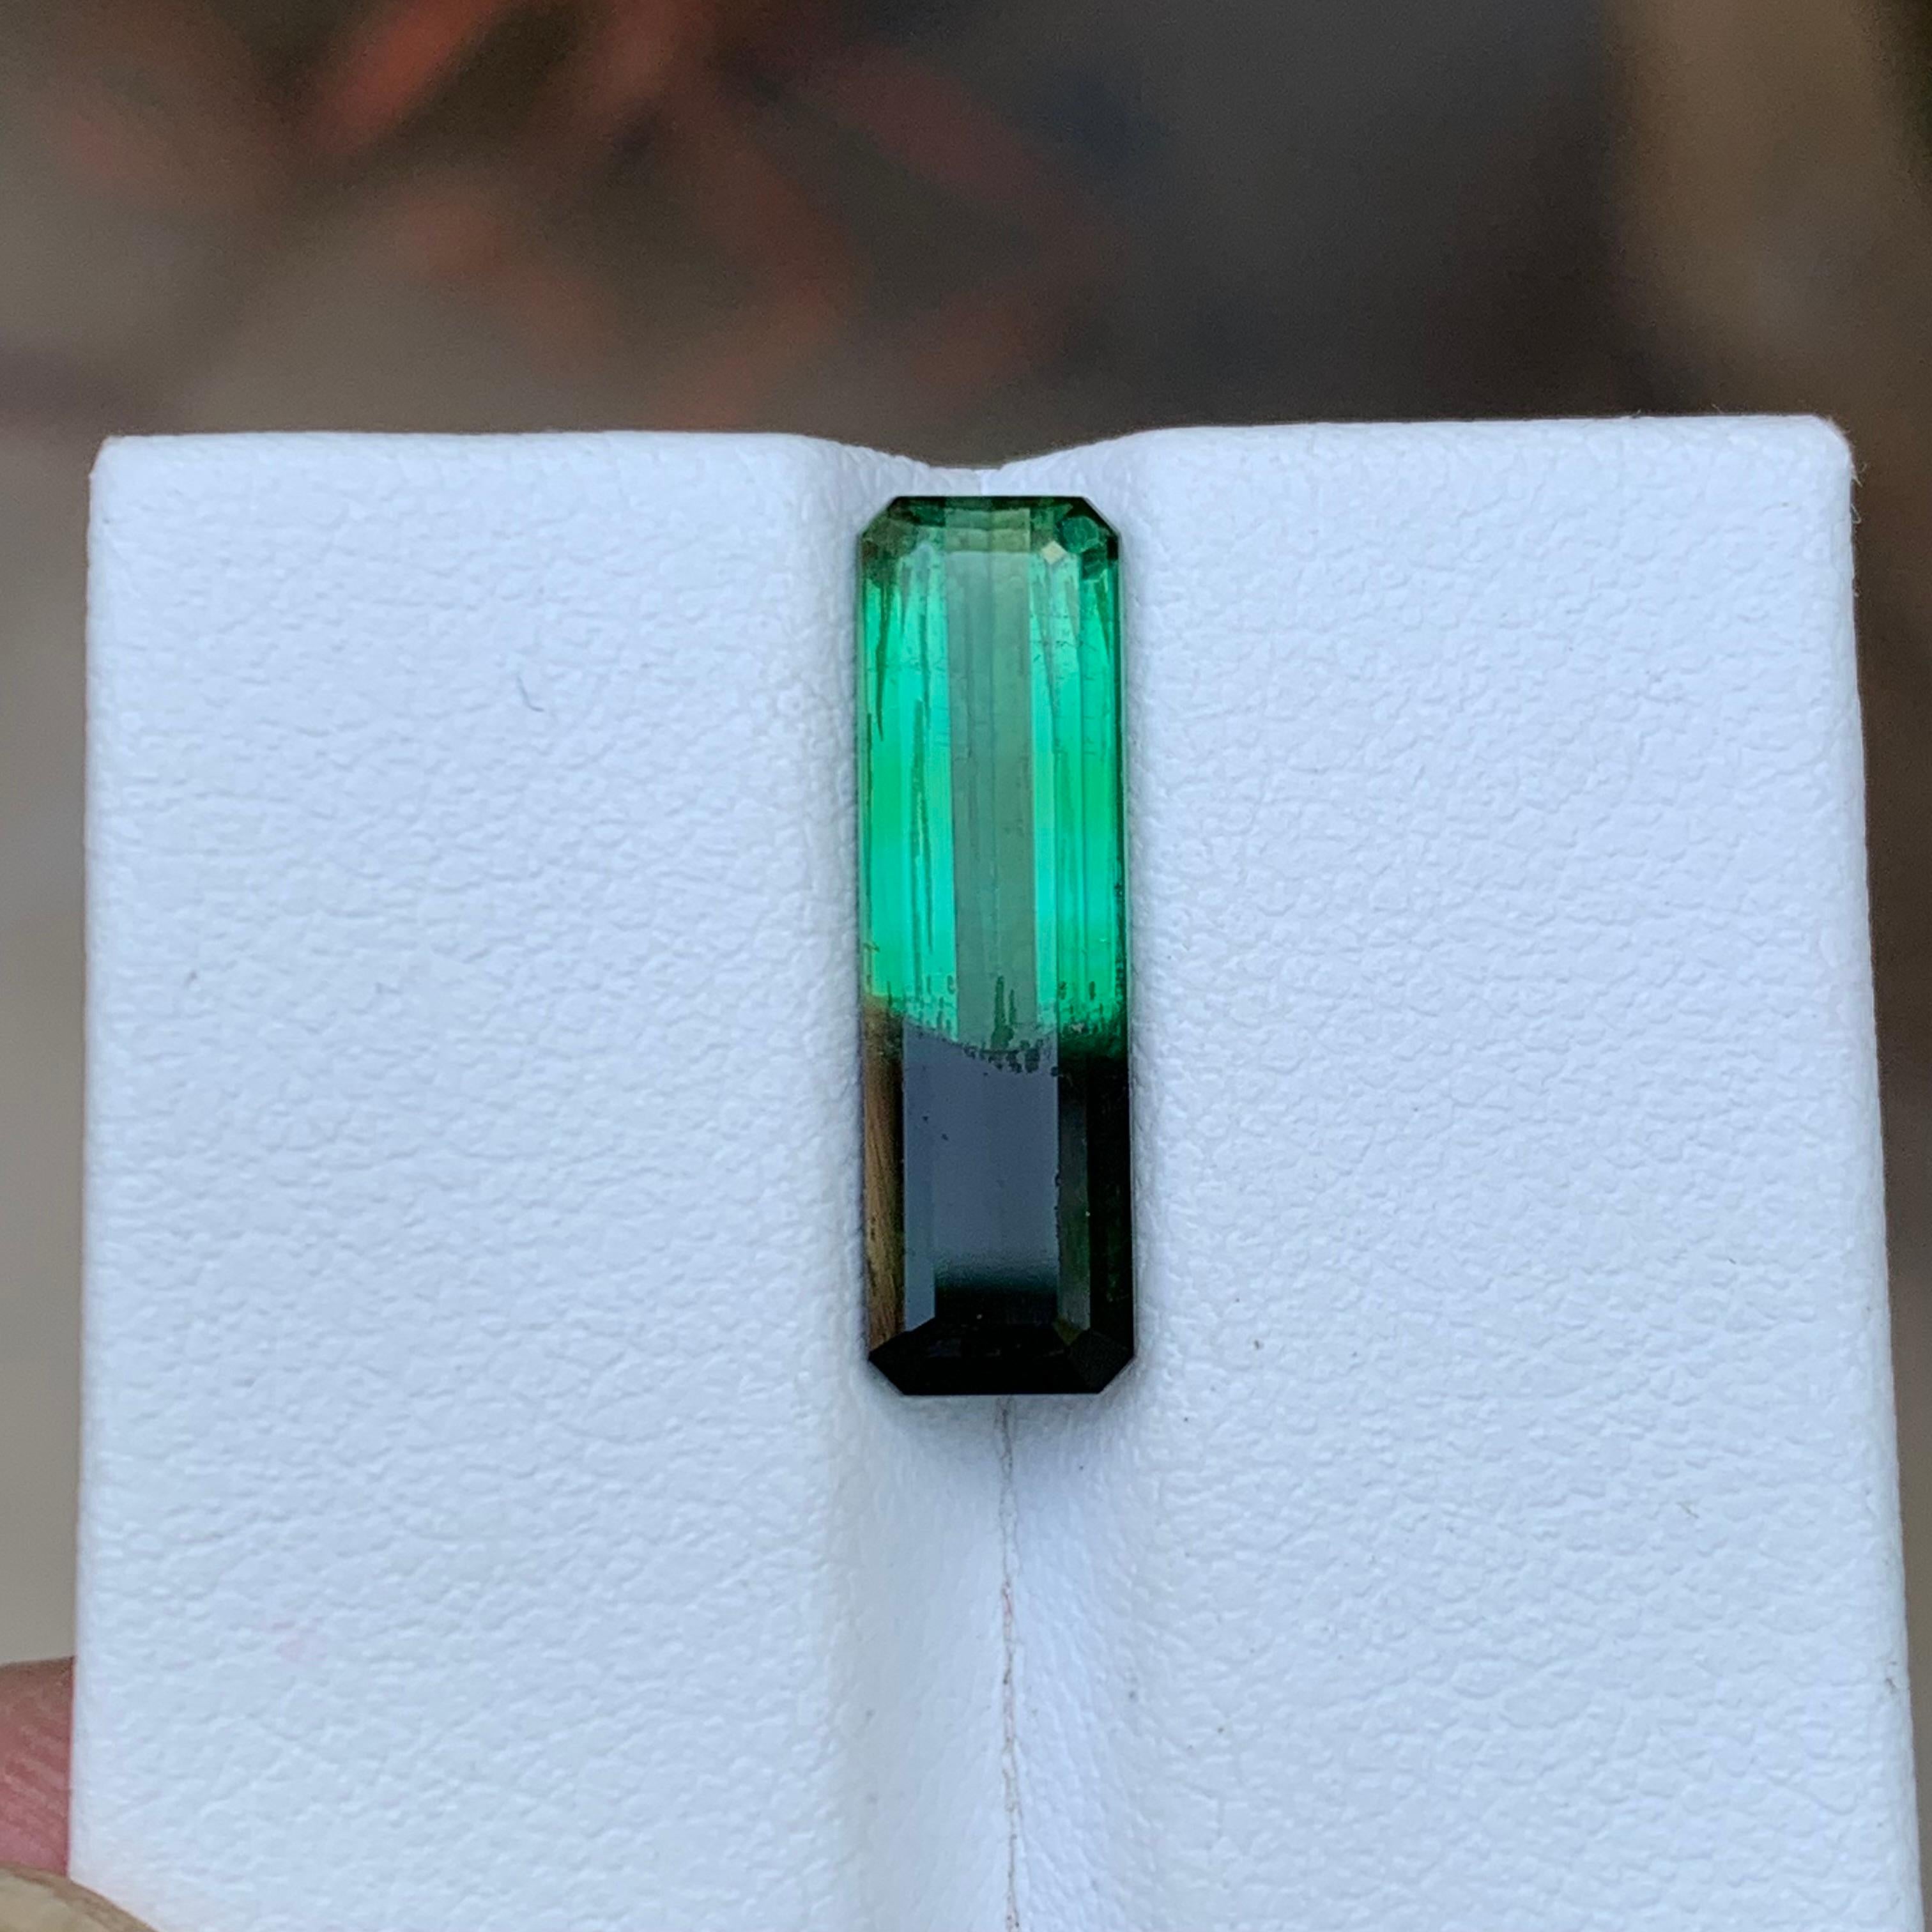 GEMSTONE TYPE: Tourmaline
PIECE(S): 1
WEIGHT: 3.90 Carats
SHAPE: Emerald Cut
SIZE (MM): 18.32 x 5.46 x 3.89
COLOR: Bicolor Green & Black
CLARITY: Slightly Included 
TREATMENT: None
ORIGIN: Afghanistan
CERTIFICATE: On demand

Indulge in the